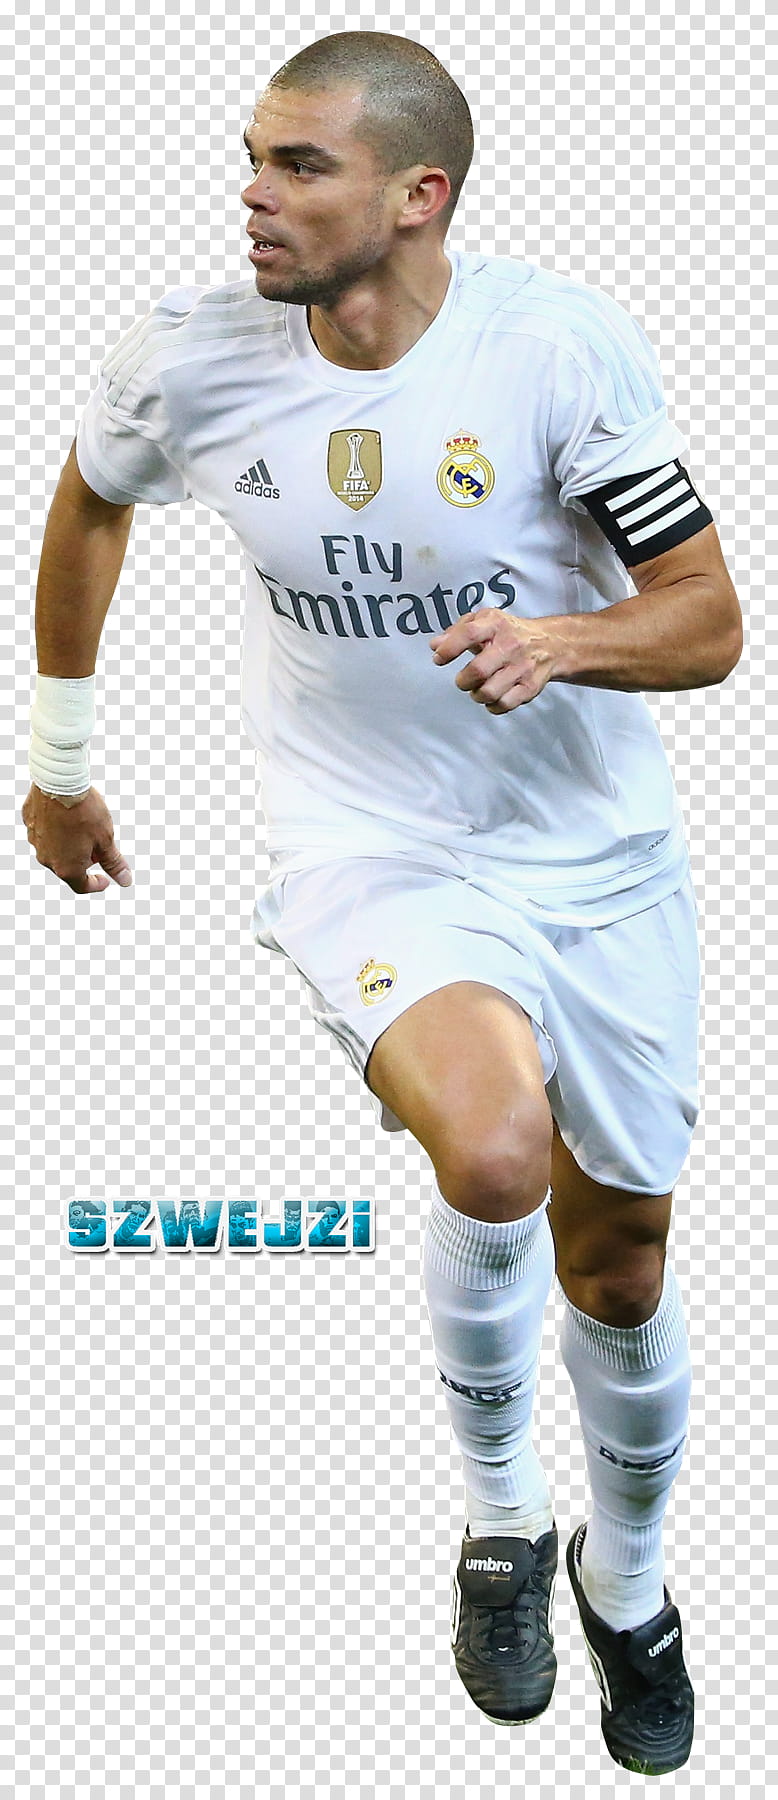 Real Madrid, Pepe, Real Madrid CF, Football, Sports, Nacho, Danilo, Sergio Ramos transparent background PNG clipart